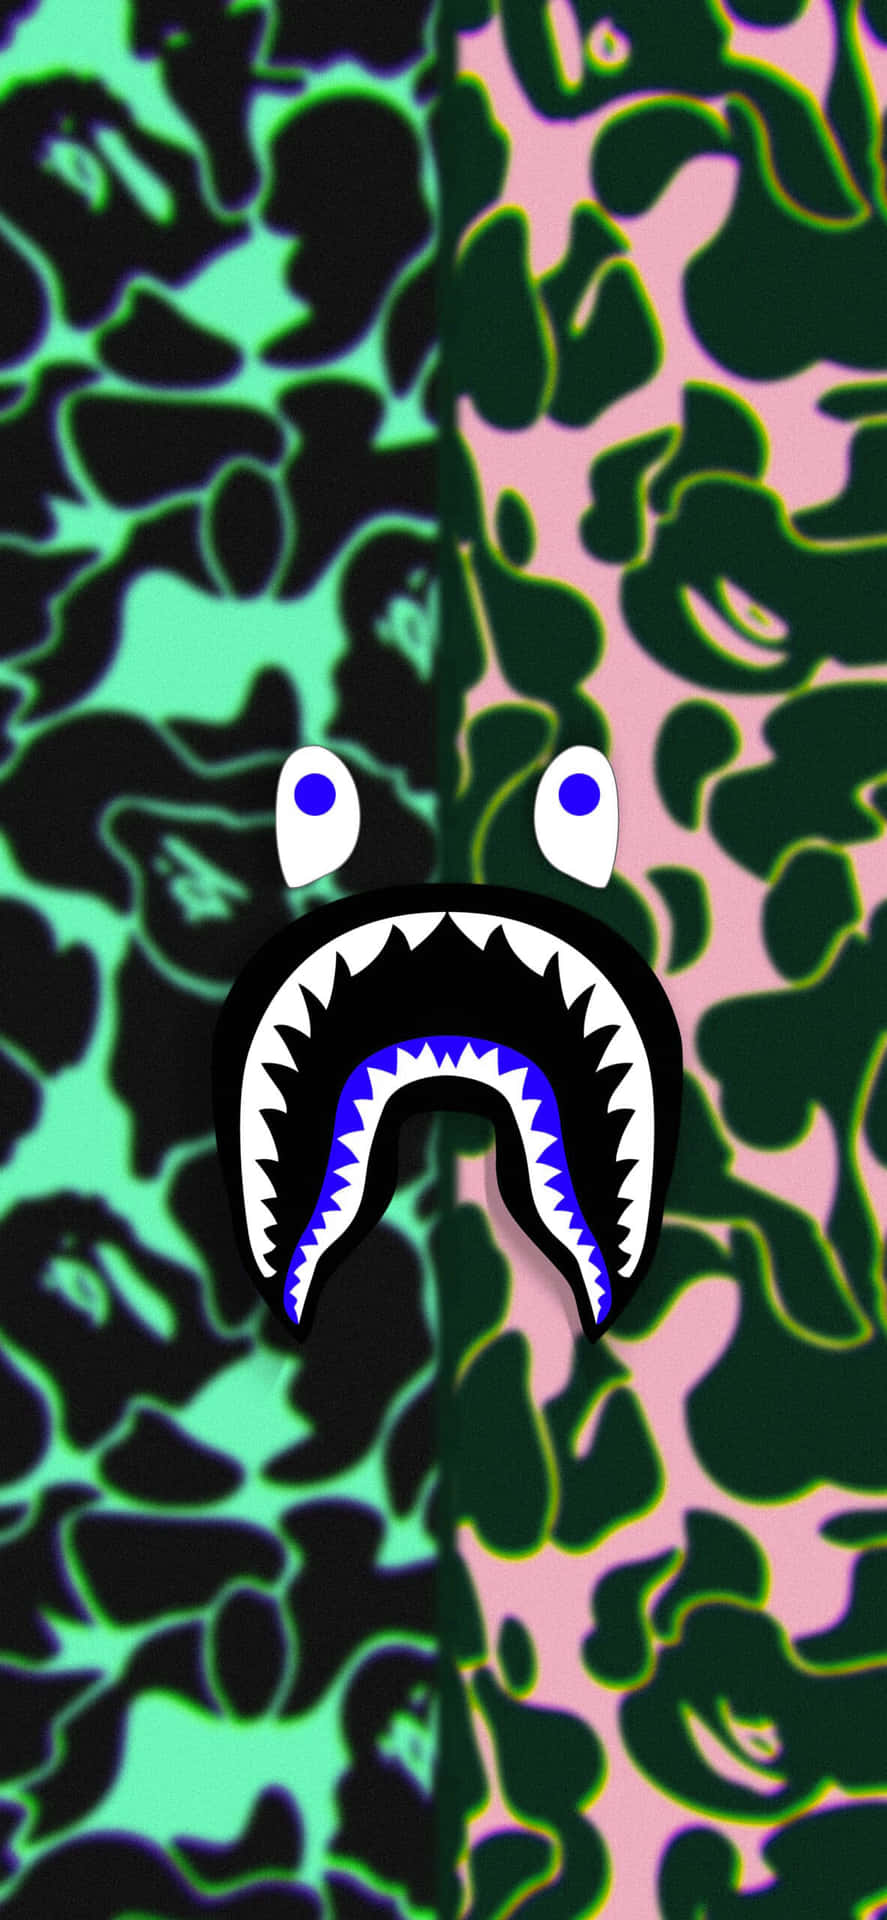 Be the trendsetter with the Bape iPhone Wallpaper